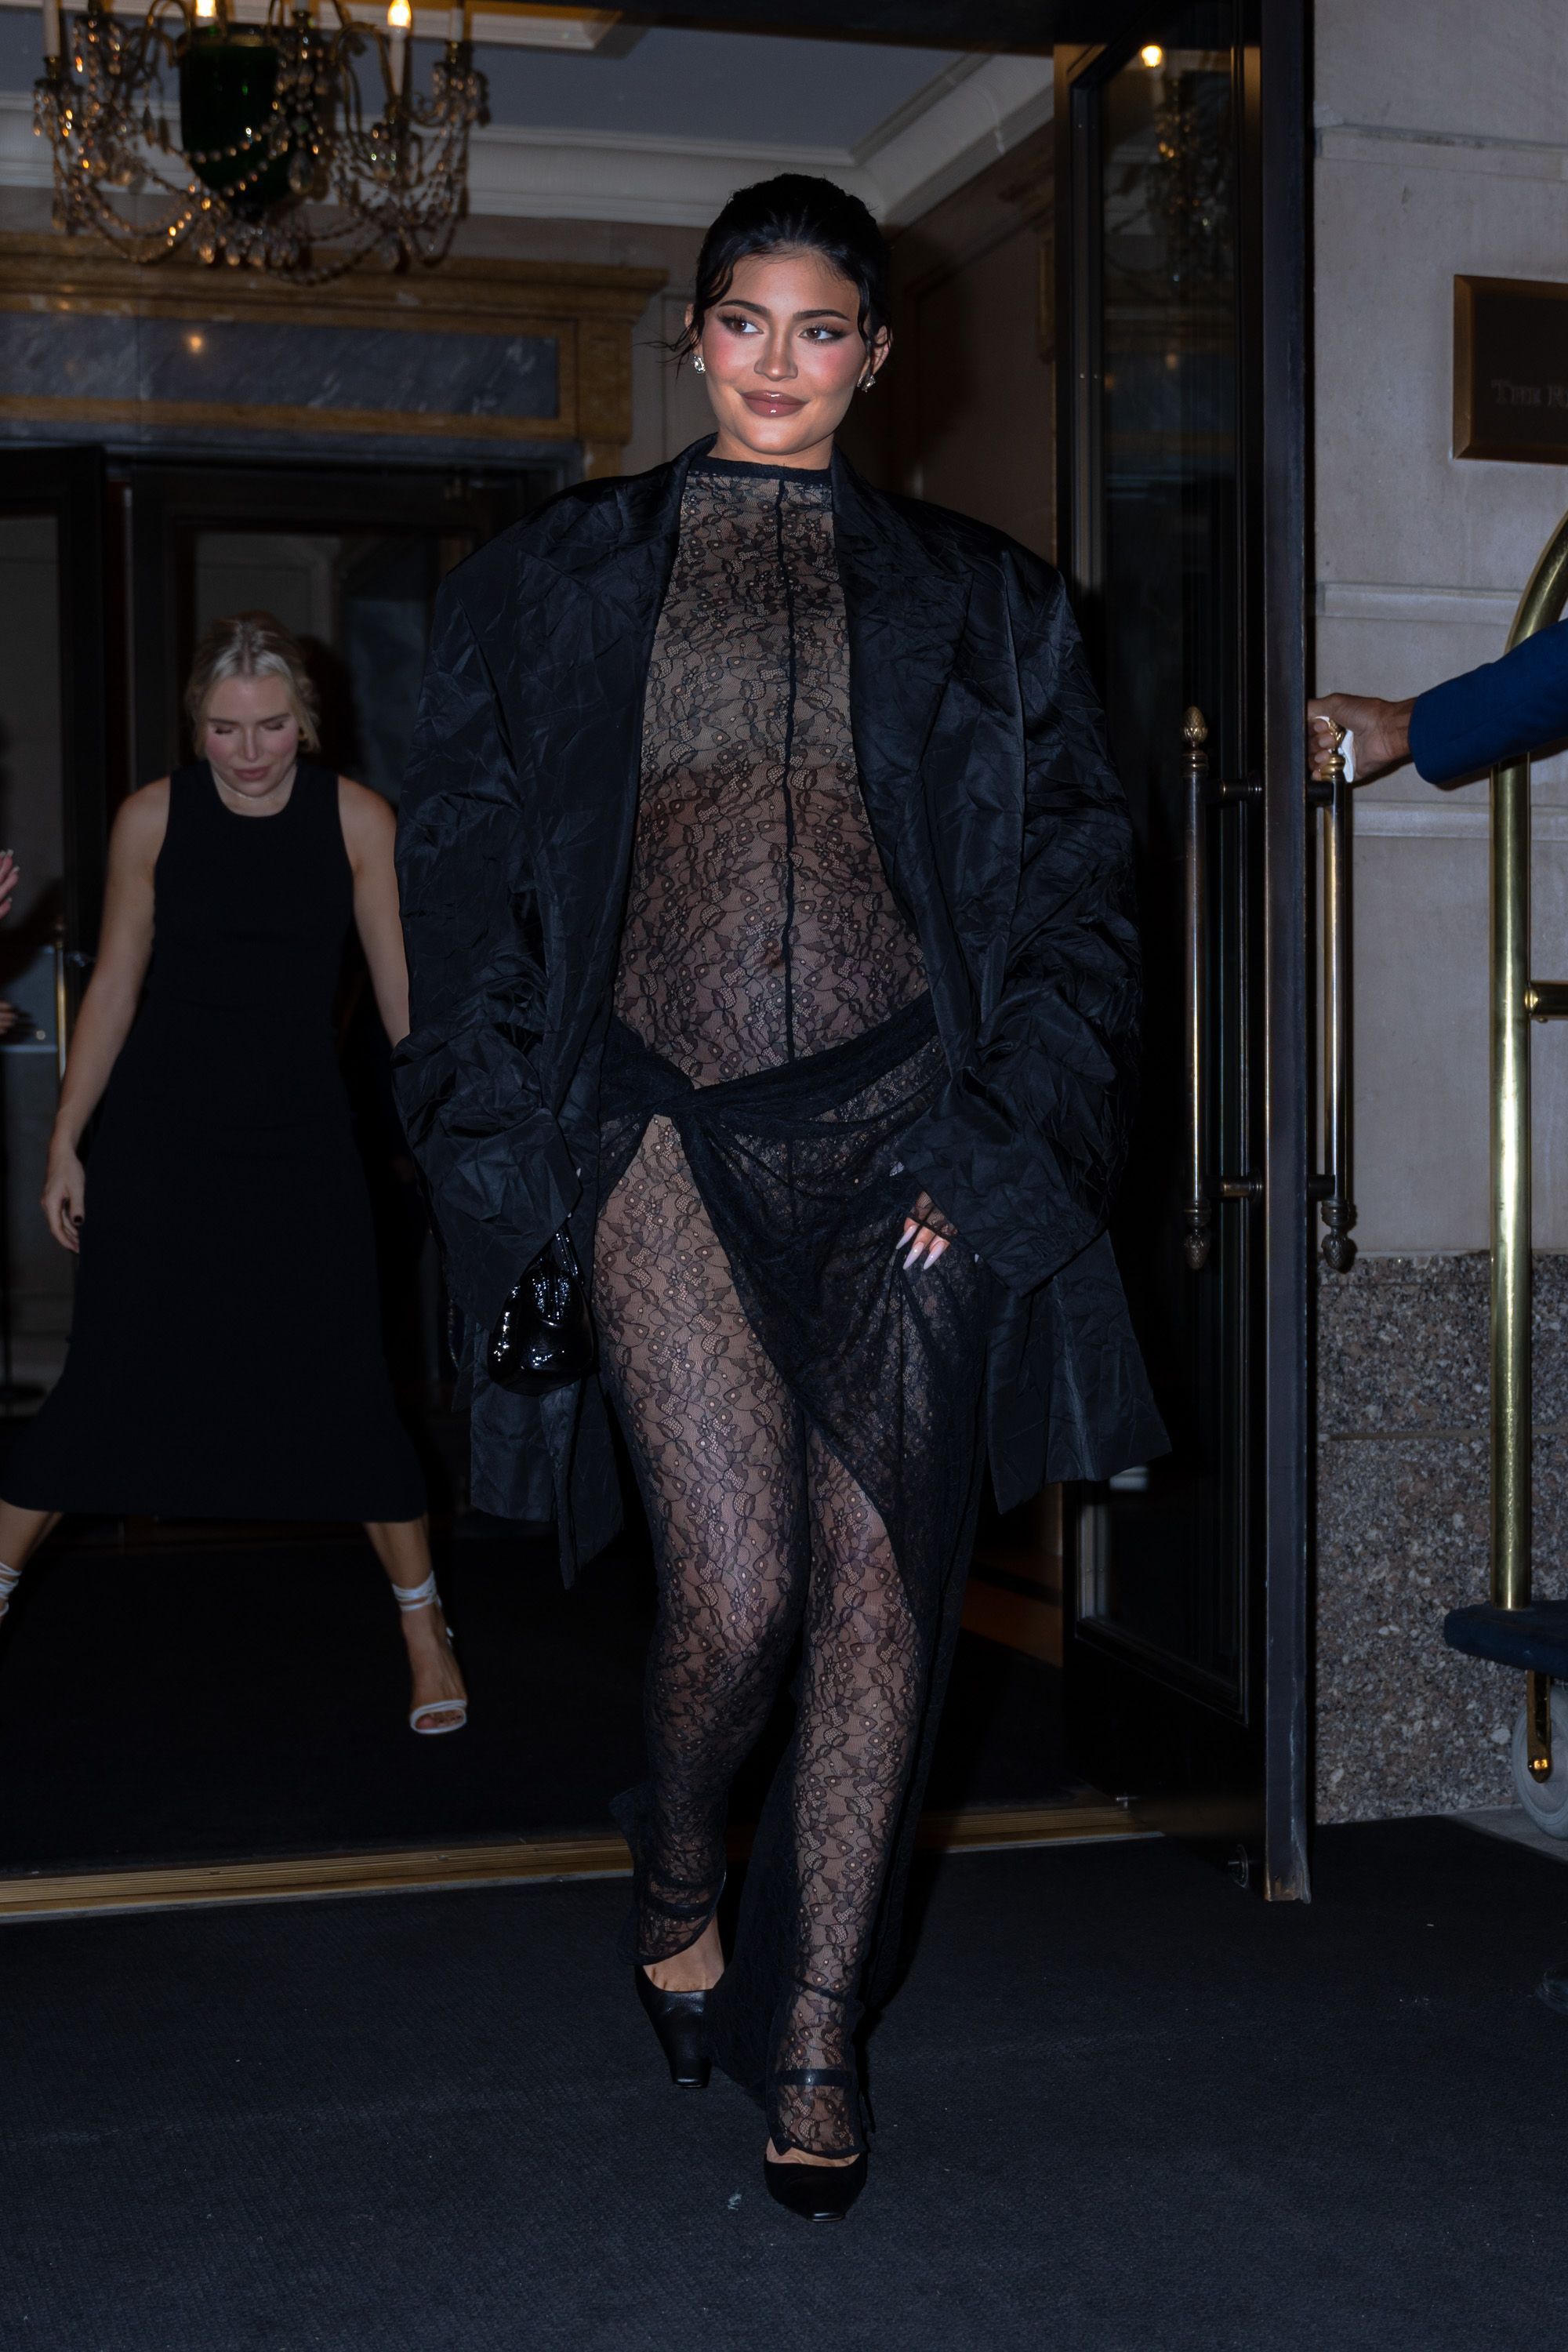 Kylie Jenner steps out in a see-through leggins (photos)